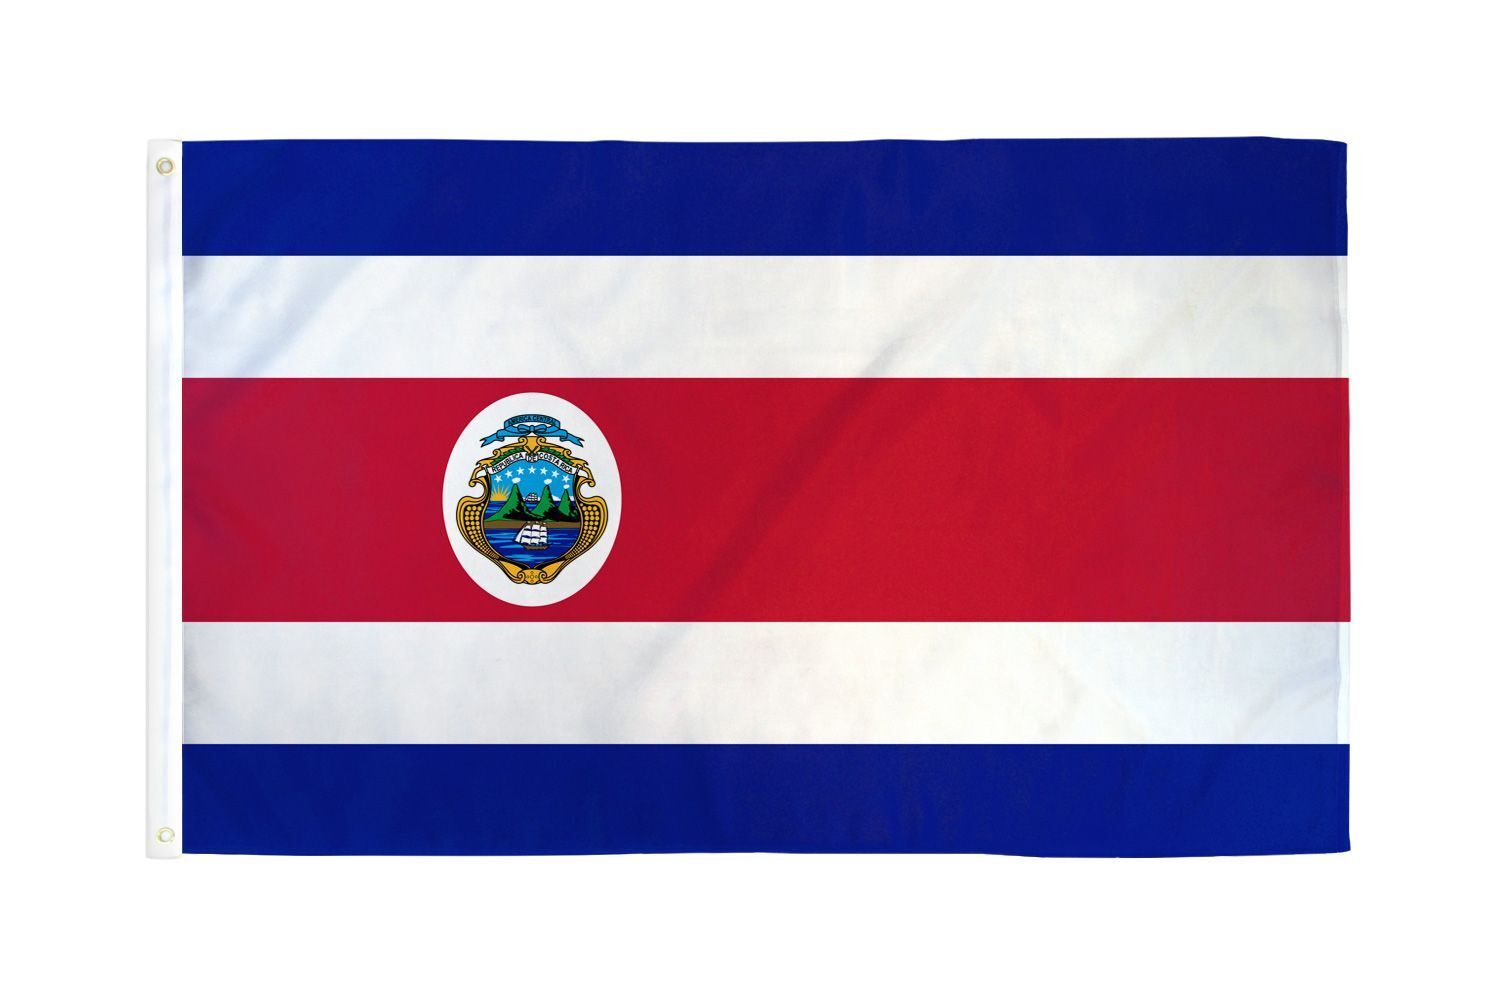 Huge 3' x 5' High Quality Costa Rica Flag with Crest - Free USA Shipping